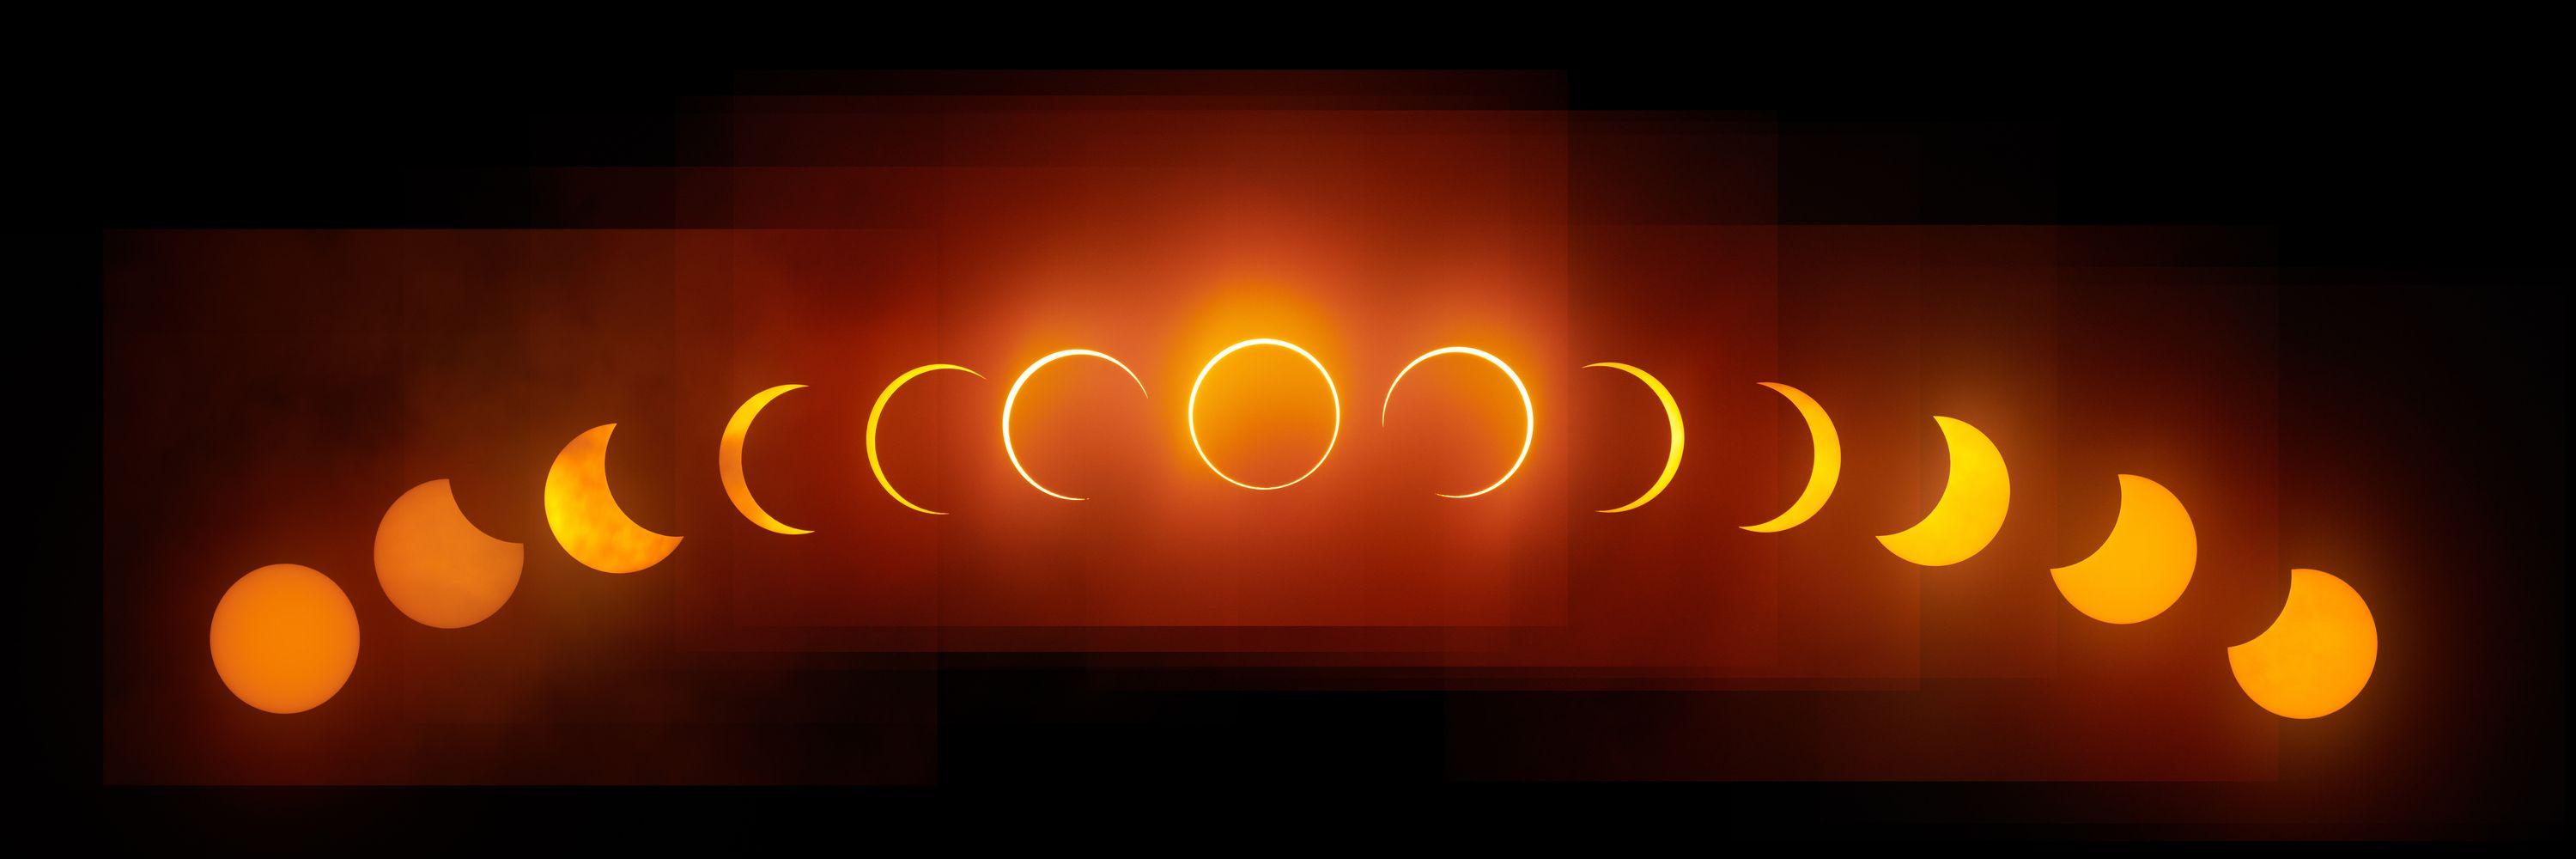 Fases del eclipse anular